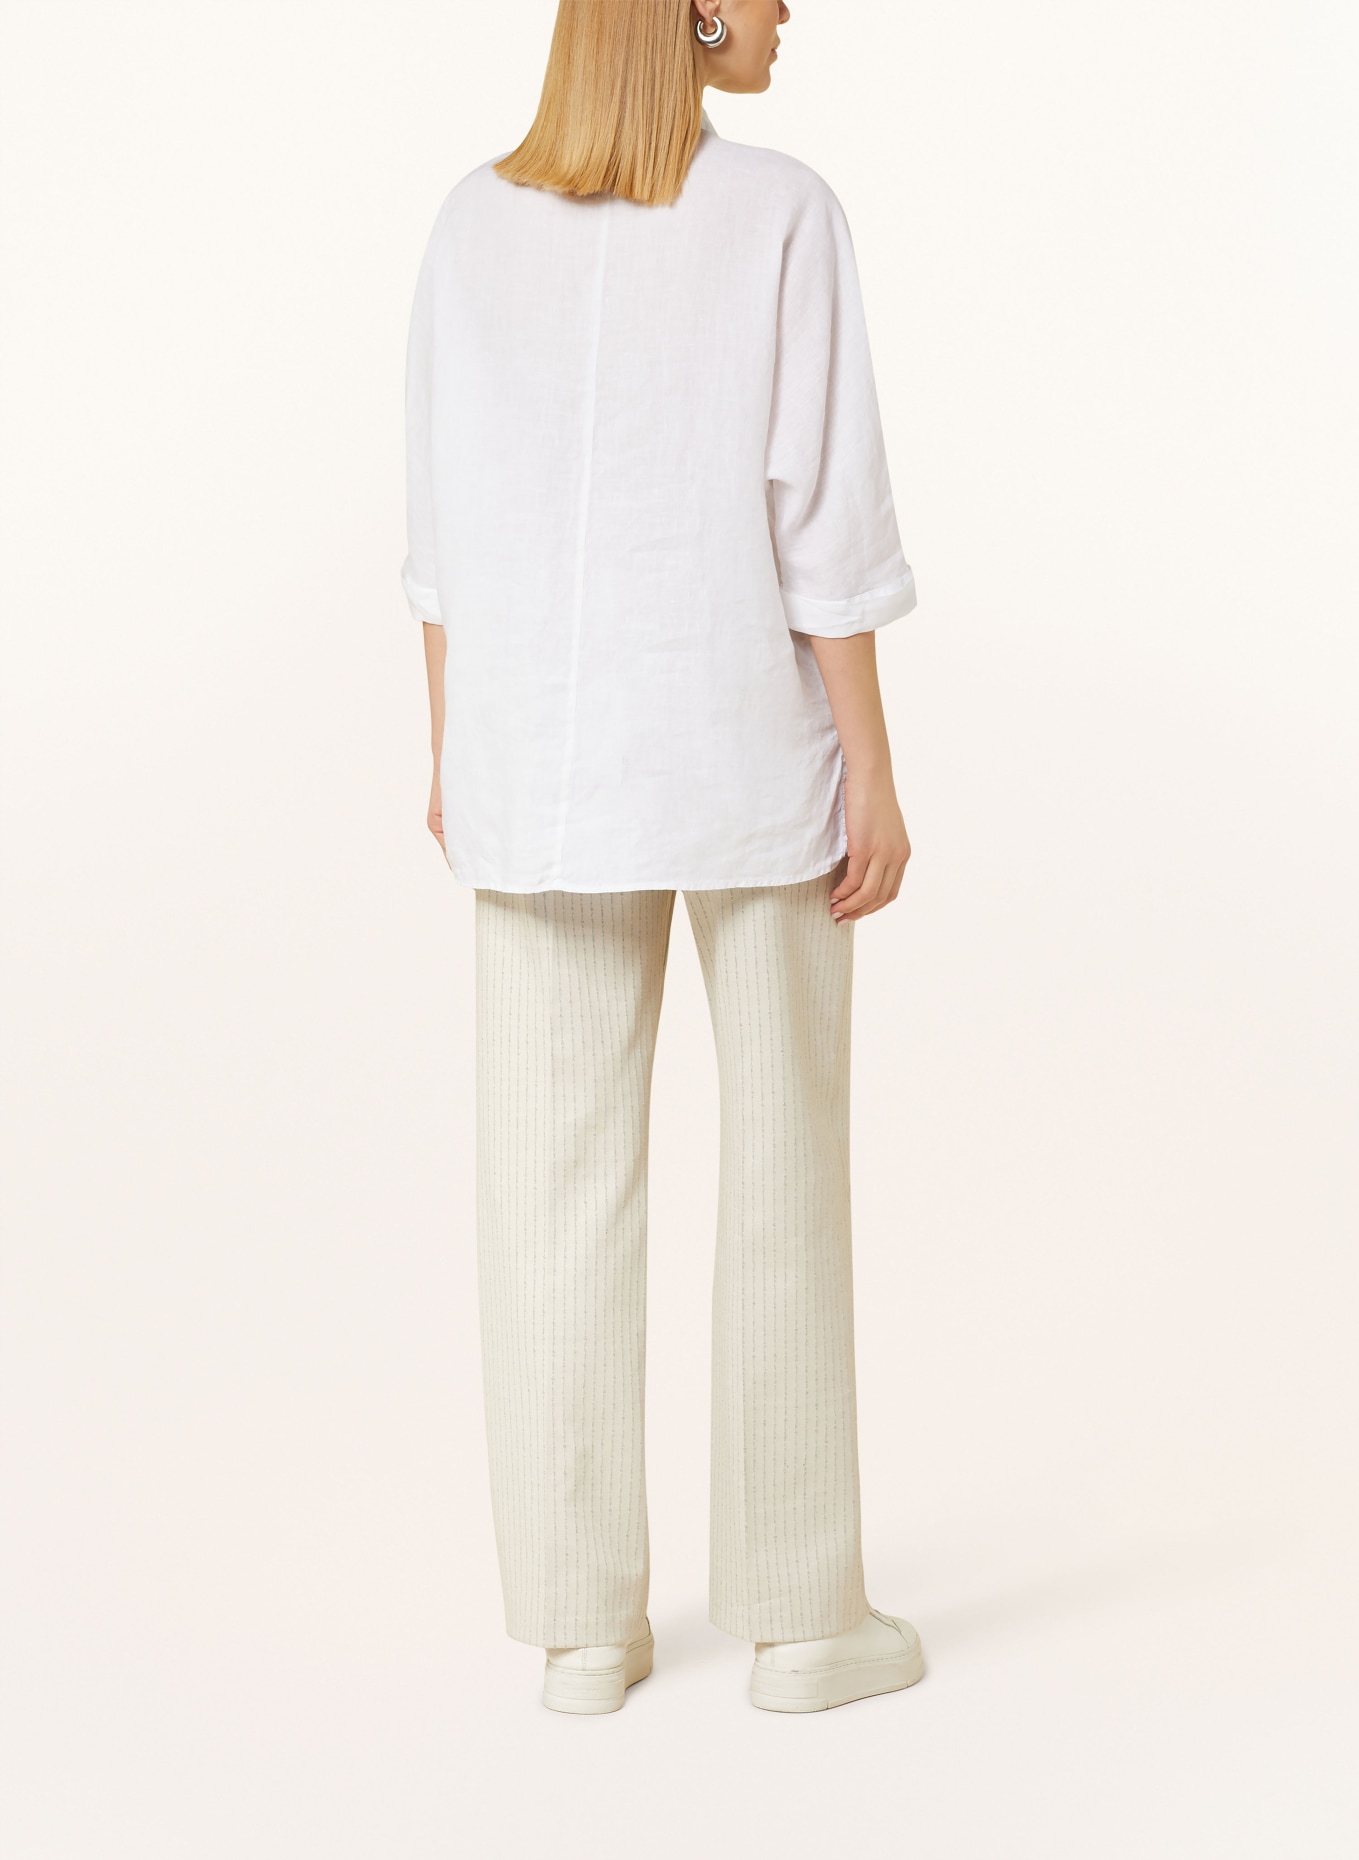 ETERNA 1863 Oversized shirt blouse made of linen with 3/4 sleeves, Color: WHITE (Image 3)